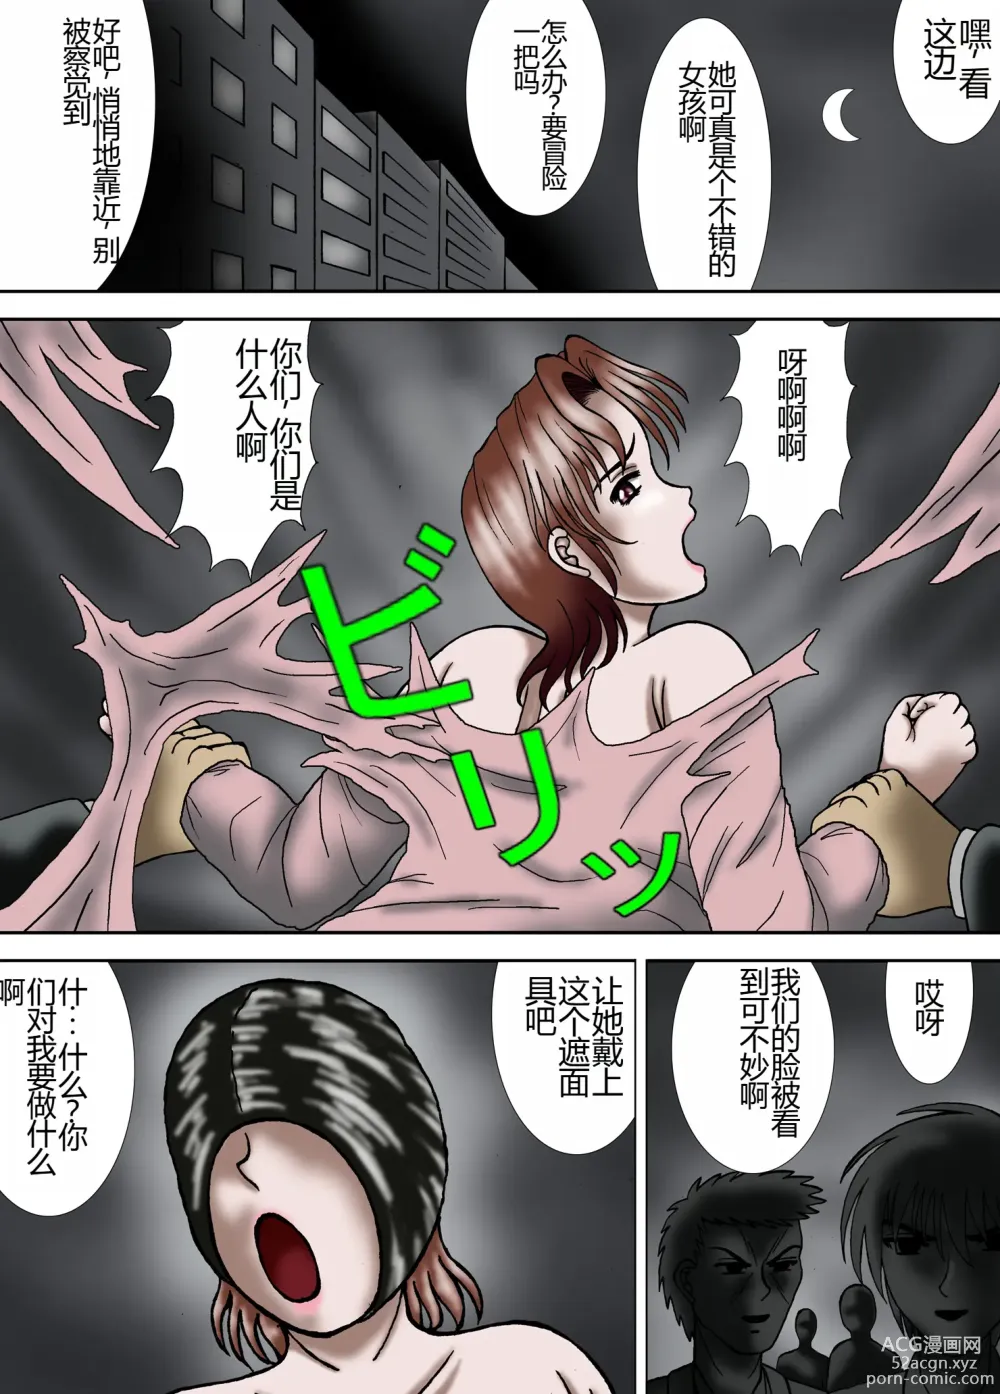 Page 2 of doujinshi Mother and Daughter, Given Leg Split